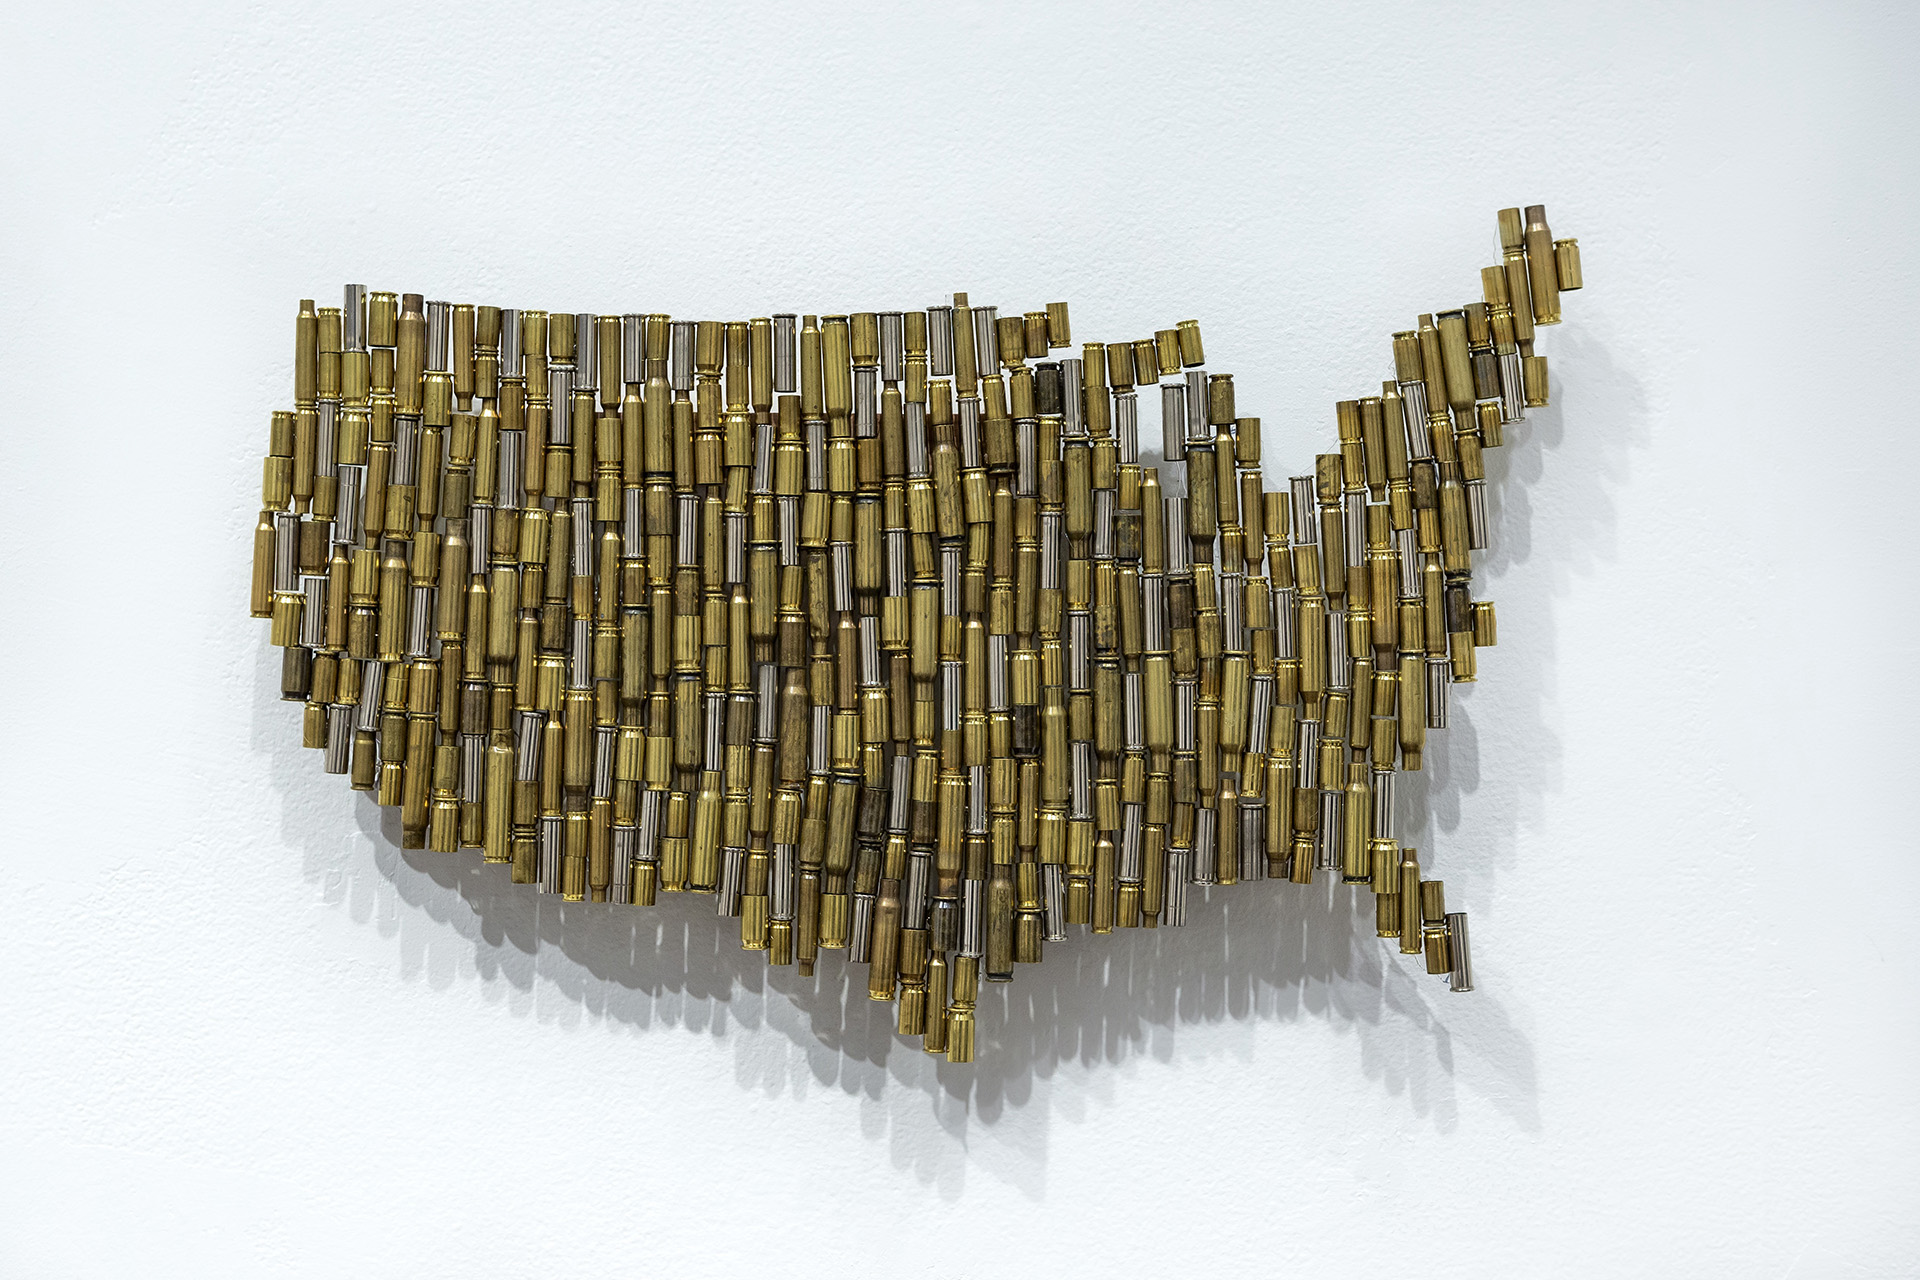 Artwork depicting the United States made of bullet casings